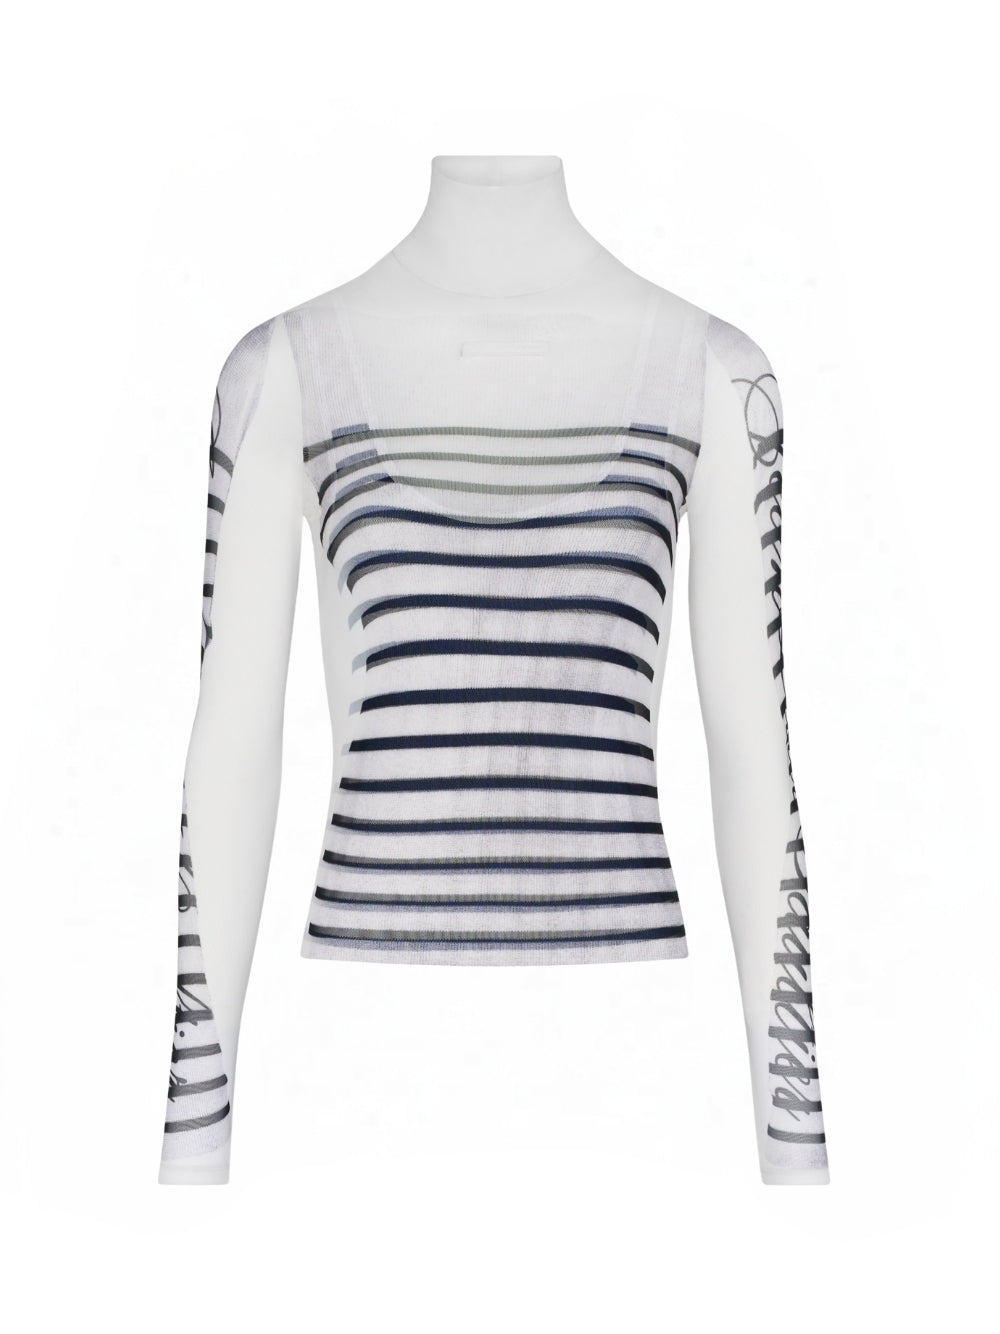 Spandex And Mesh Longsleeve Top Printed "feathers Mariniere"